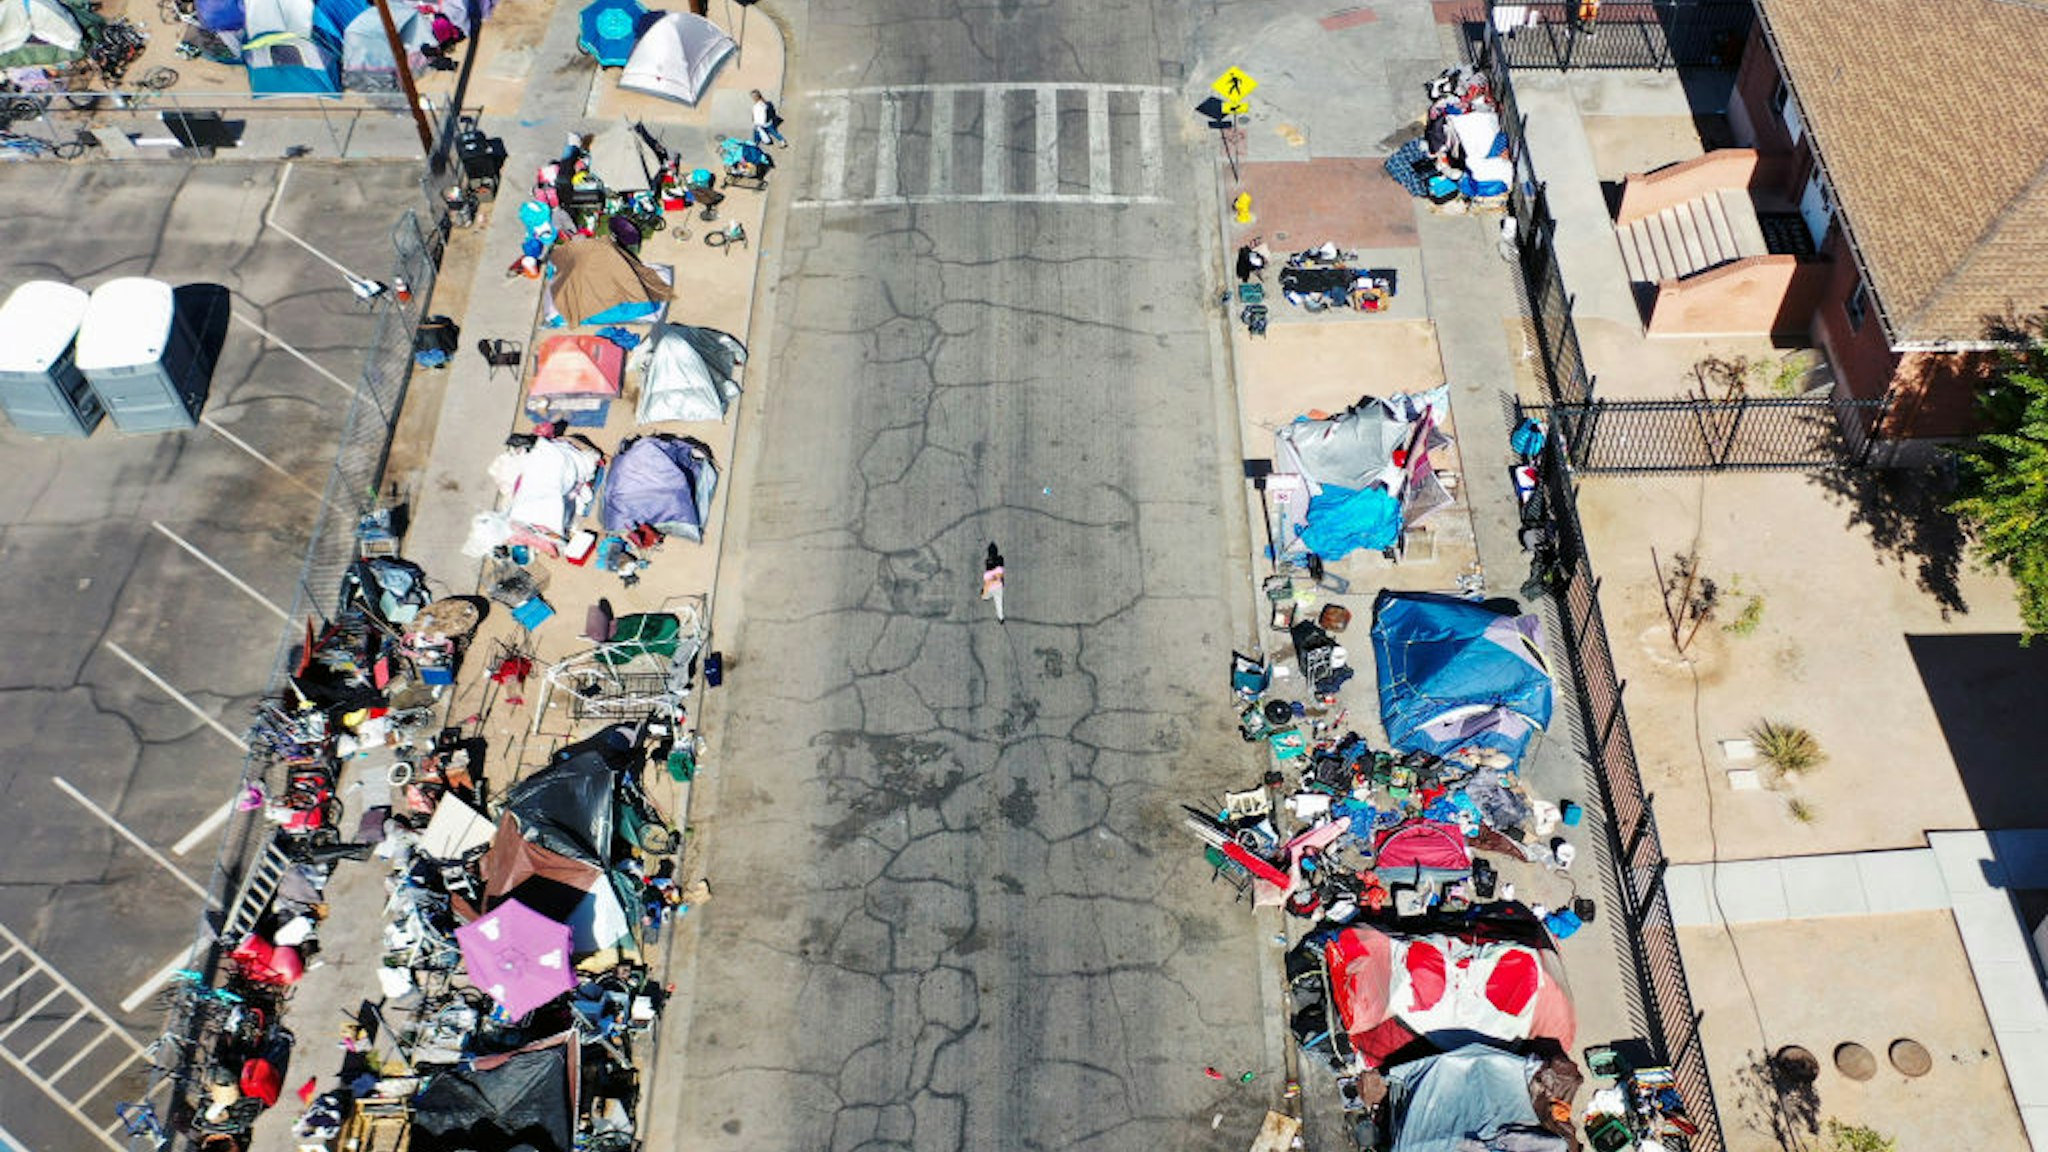 An aerial view of people gathered near a homeless encampment in the afternoon heat on July 21, 2022 in Phoenix, Arizona.